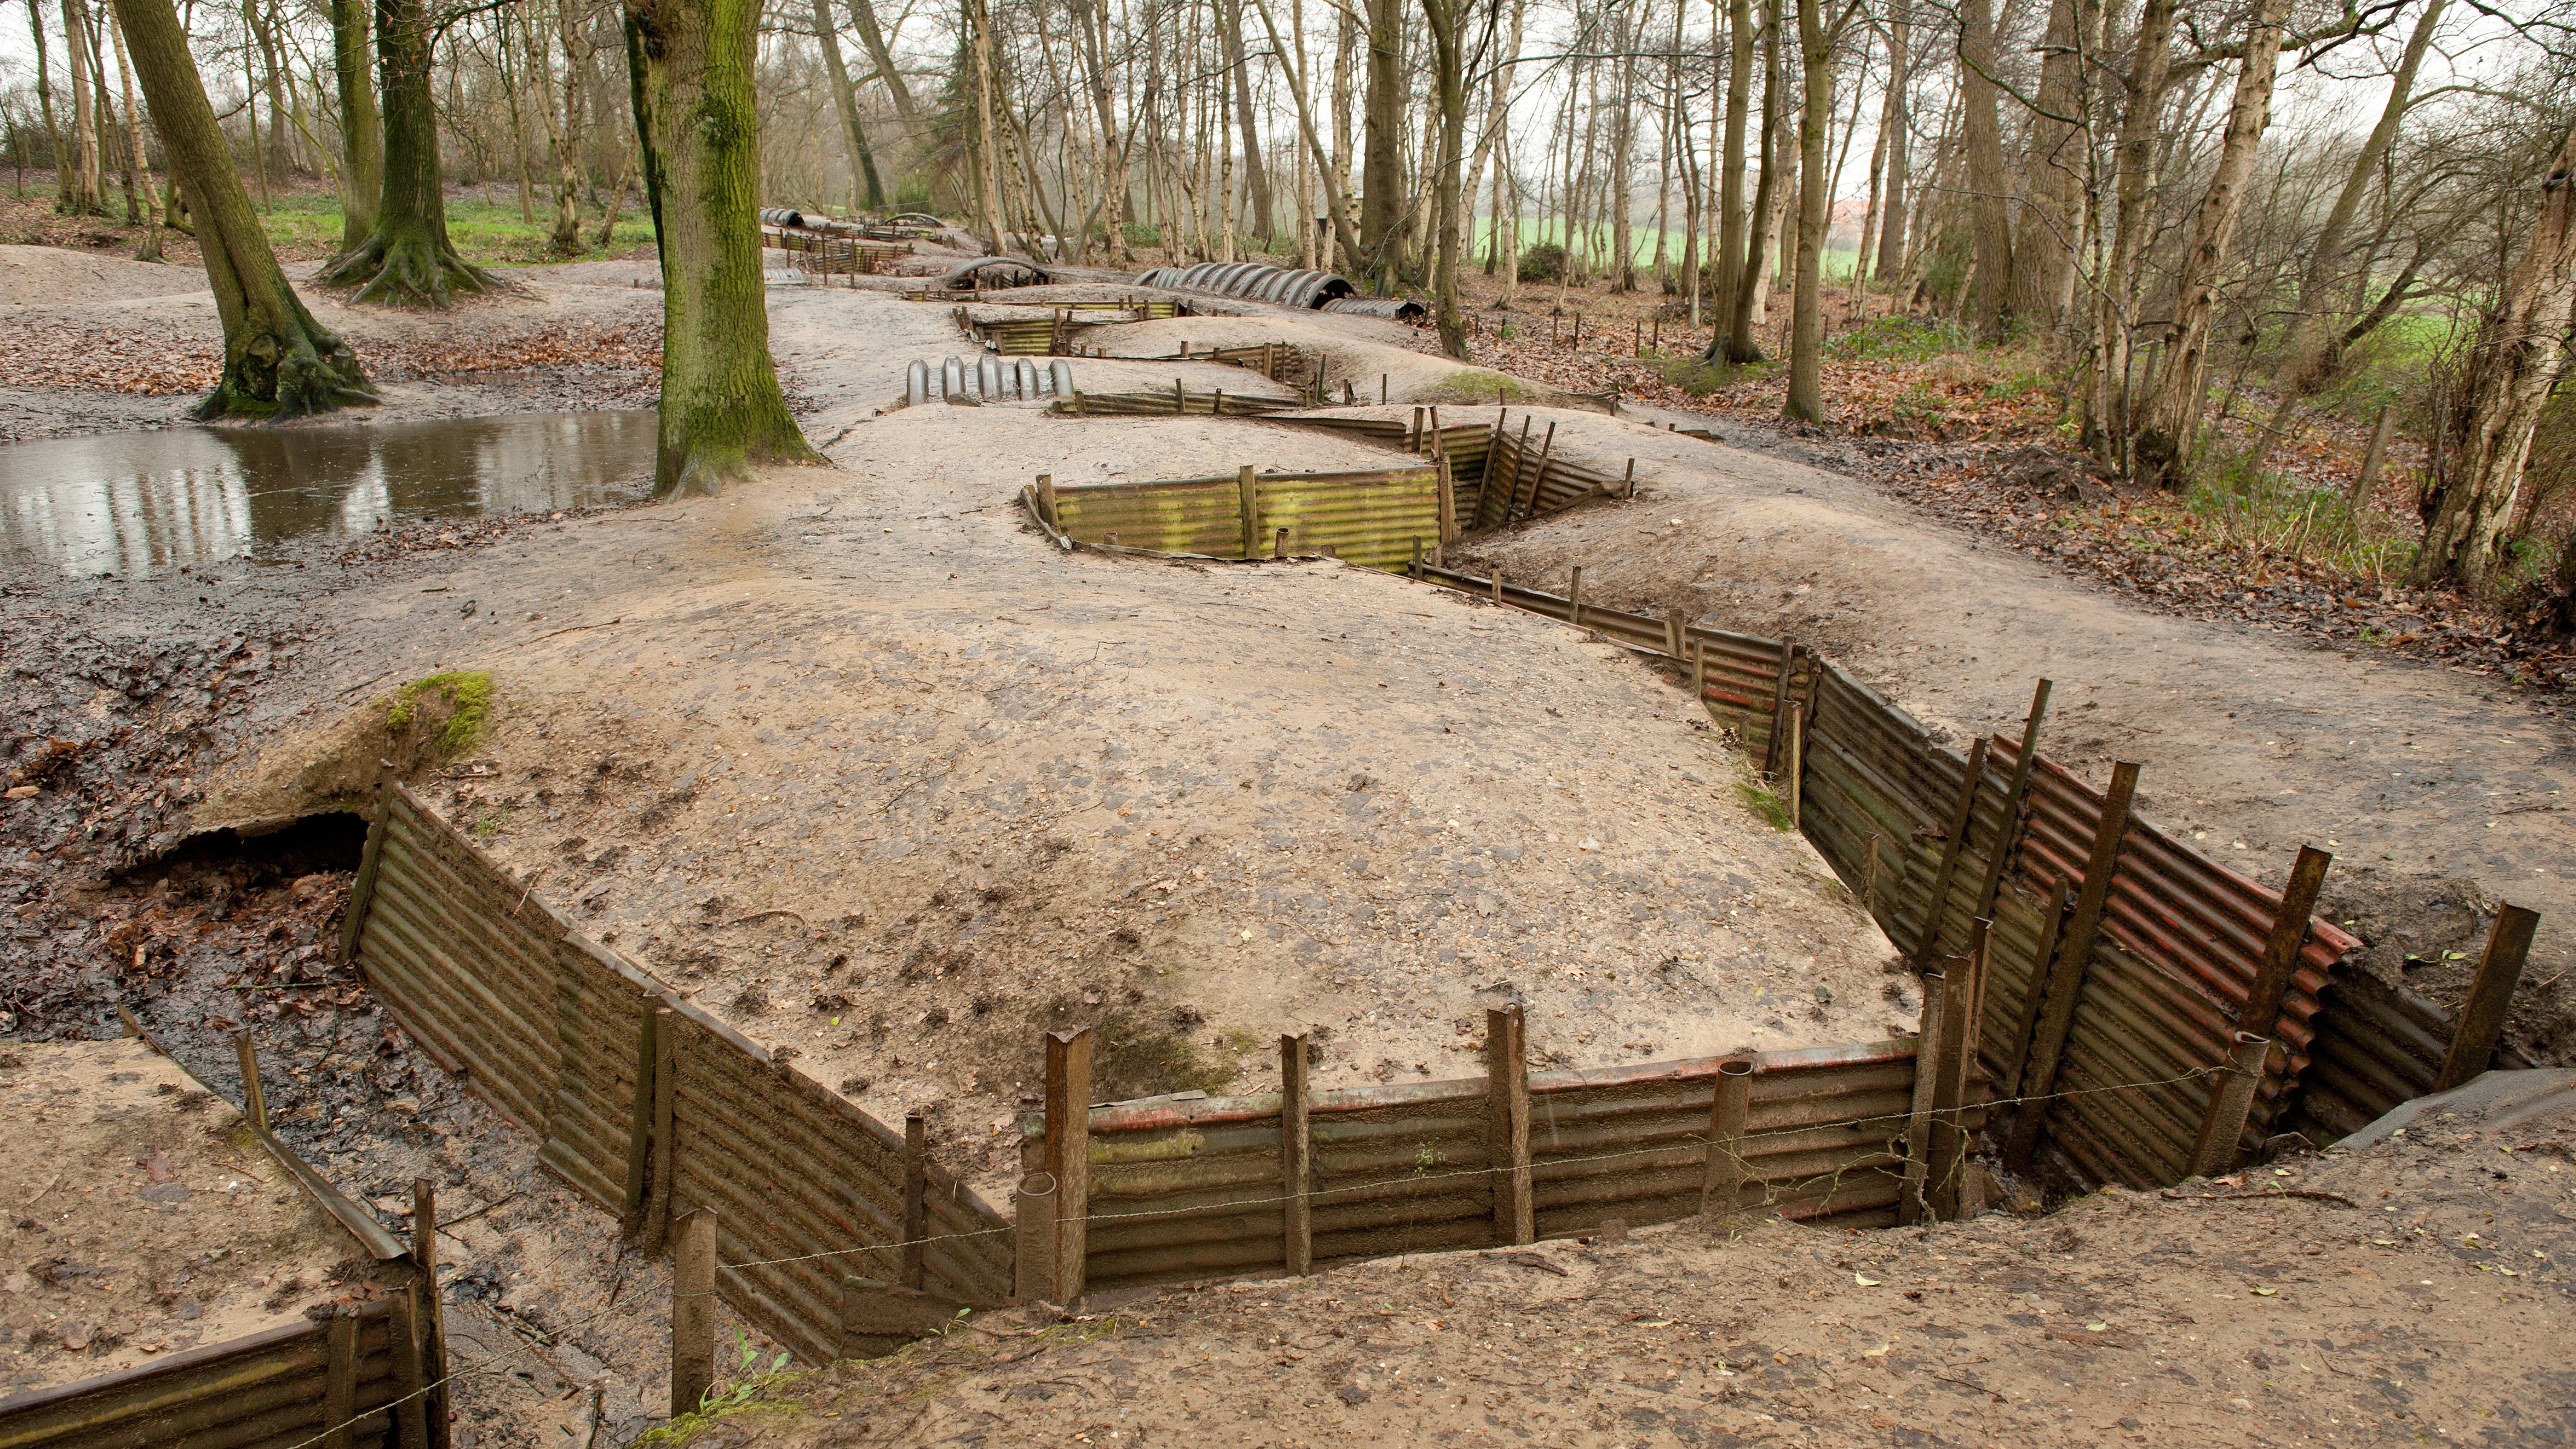 World War I trenches in Flanders, Belgium.